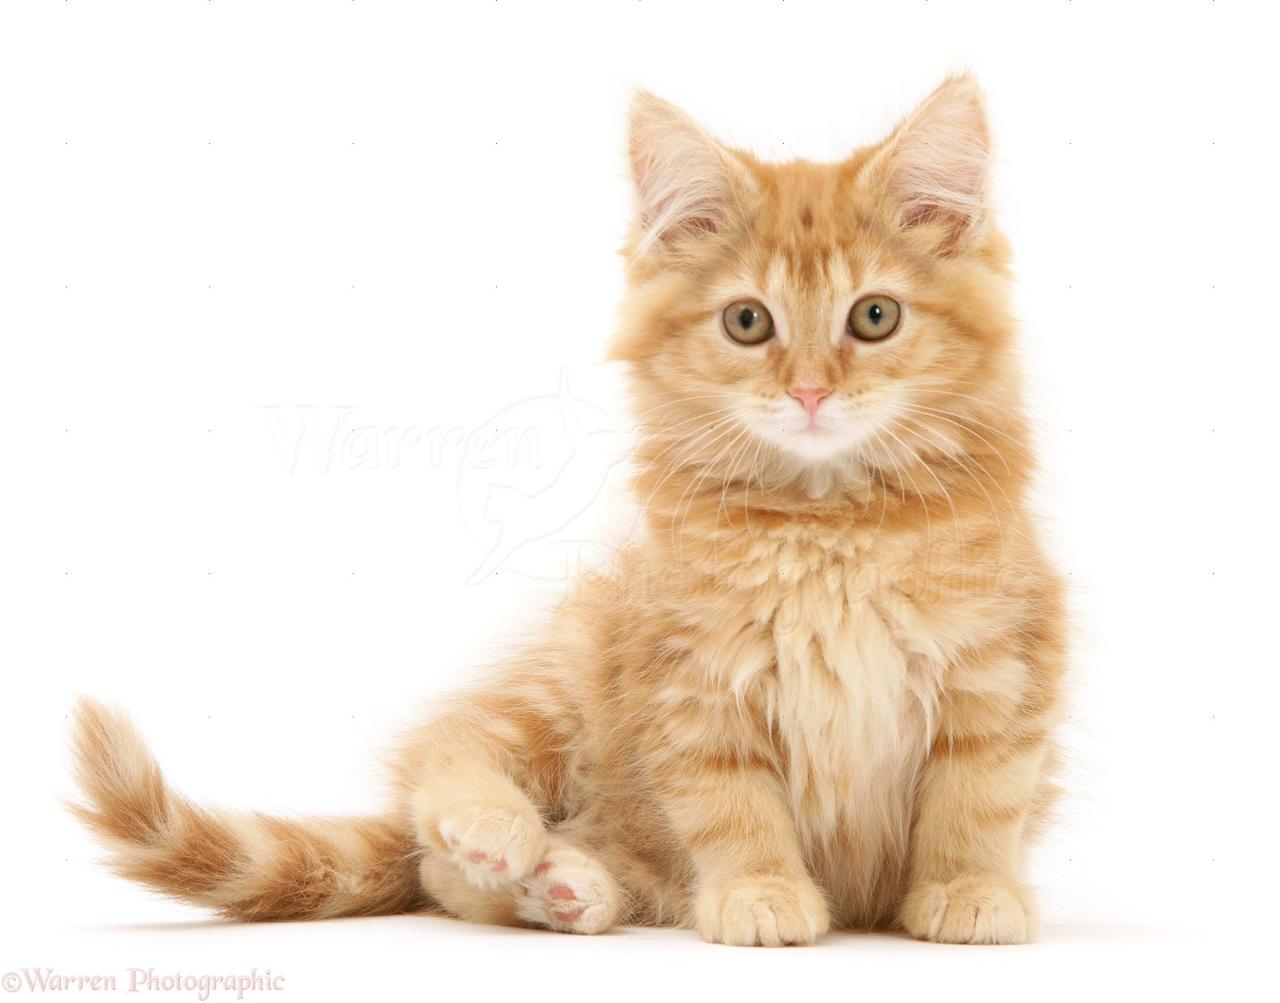 Coon maine ginger cat portrait background cats isolated sergey taran orange tabby coons photograph choose board